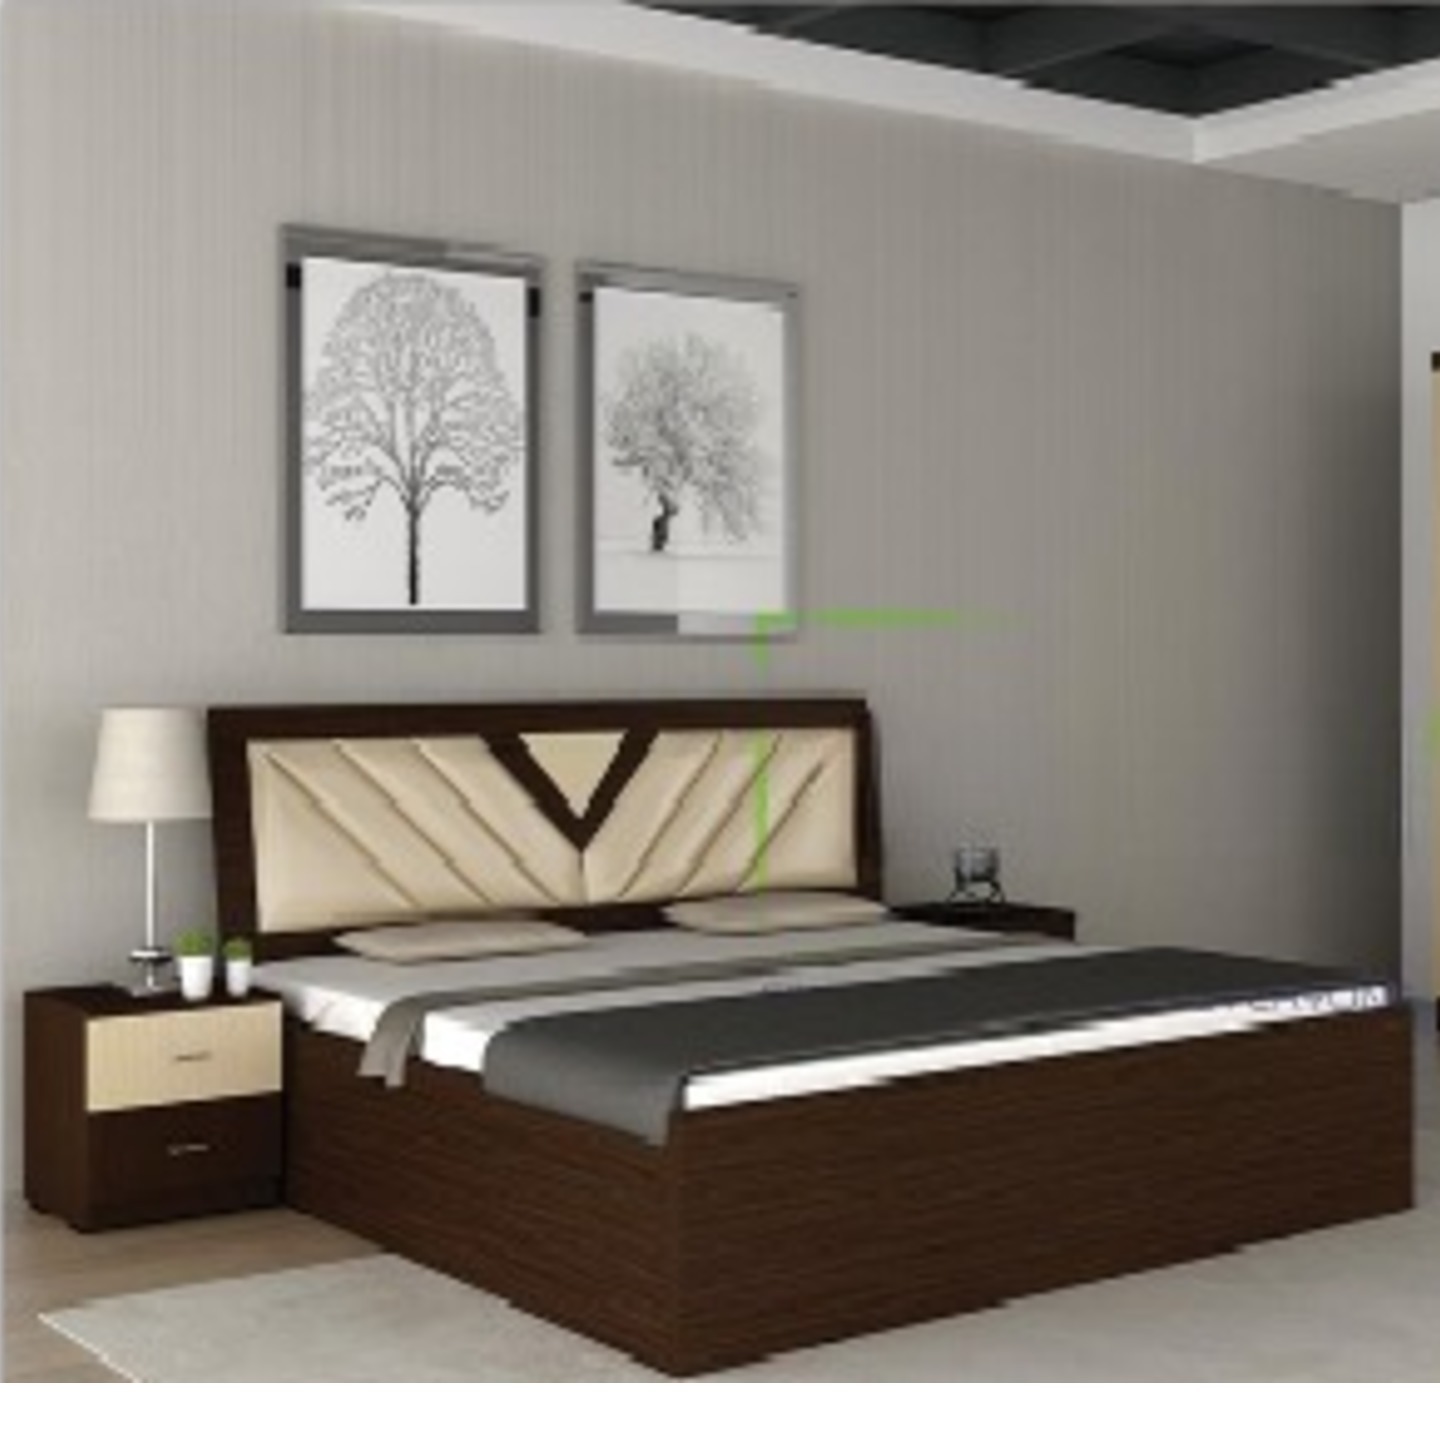 CFA King Size Bed With Manual Vega In Brown Colour